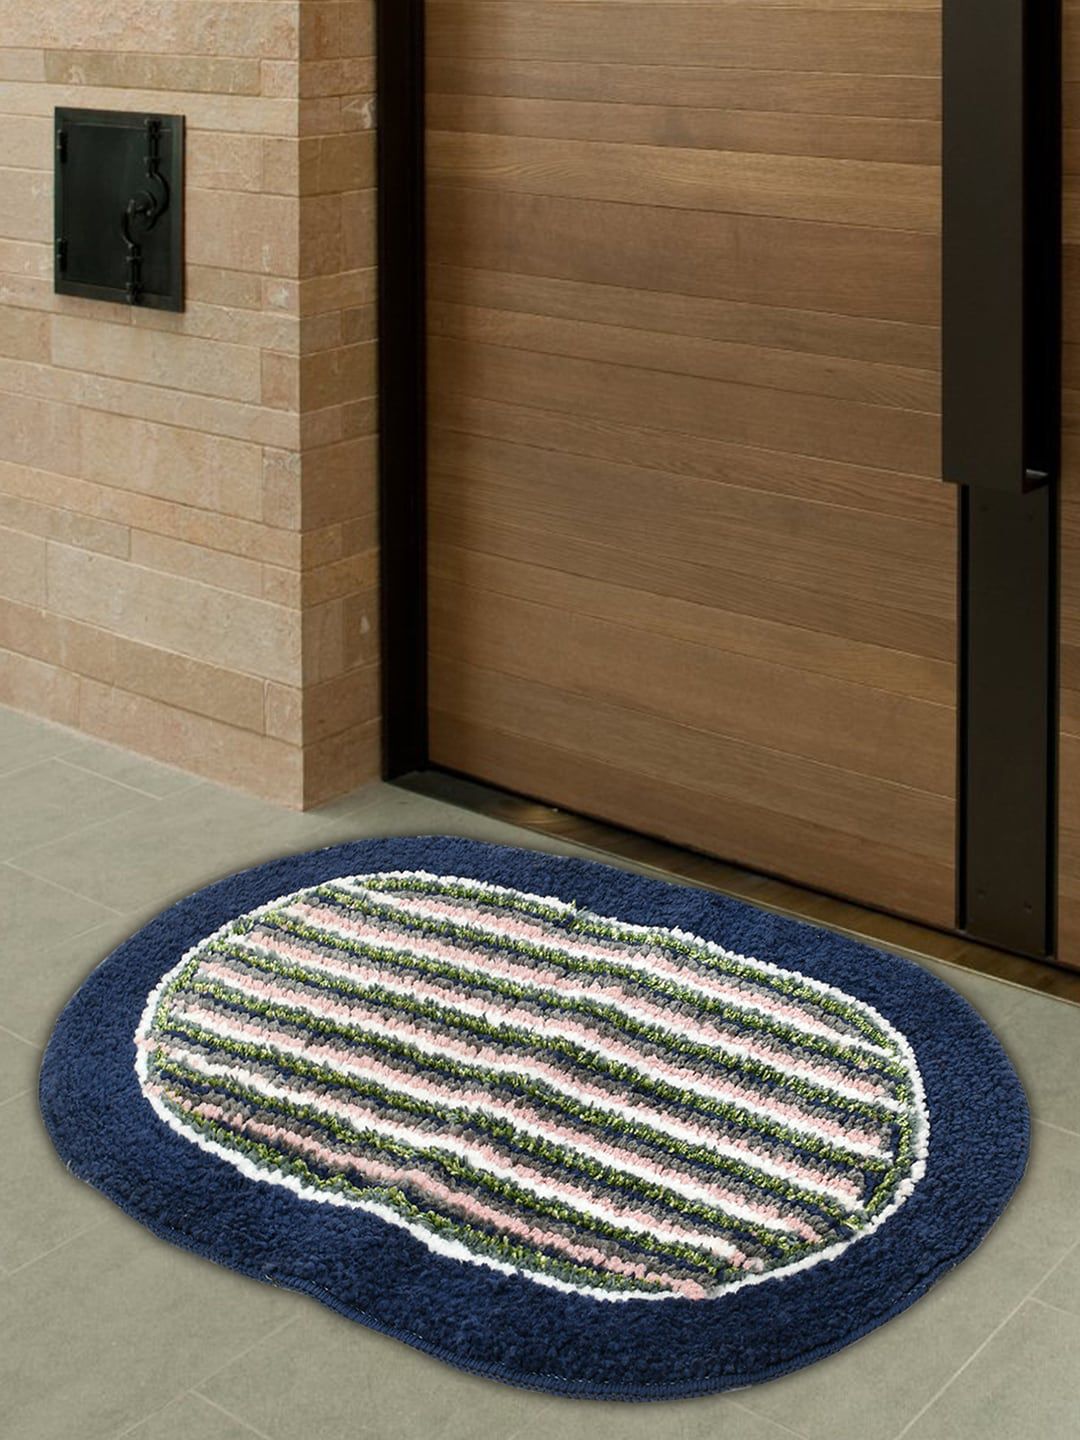 Kuber Industries Set of 3 Blue Striped Cotton Anti-Skid Doormats Price in India